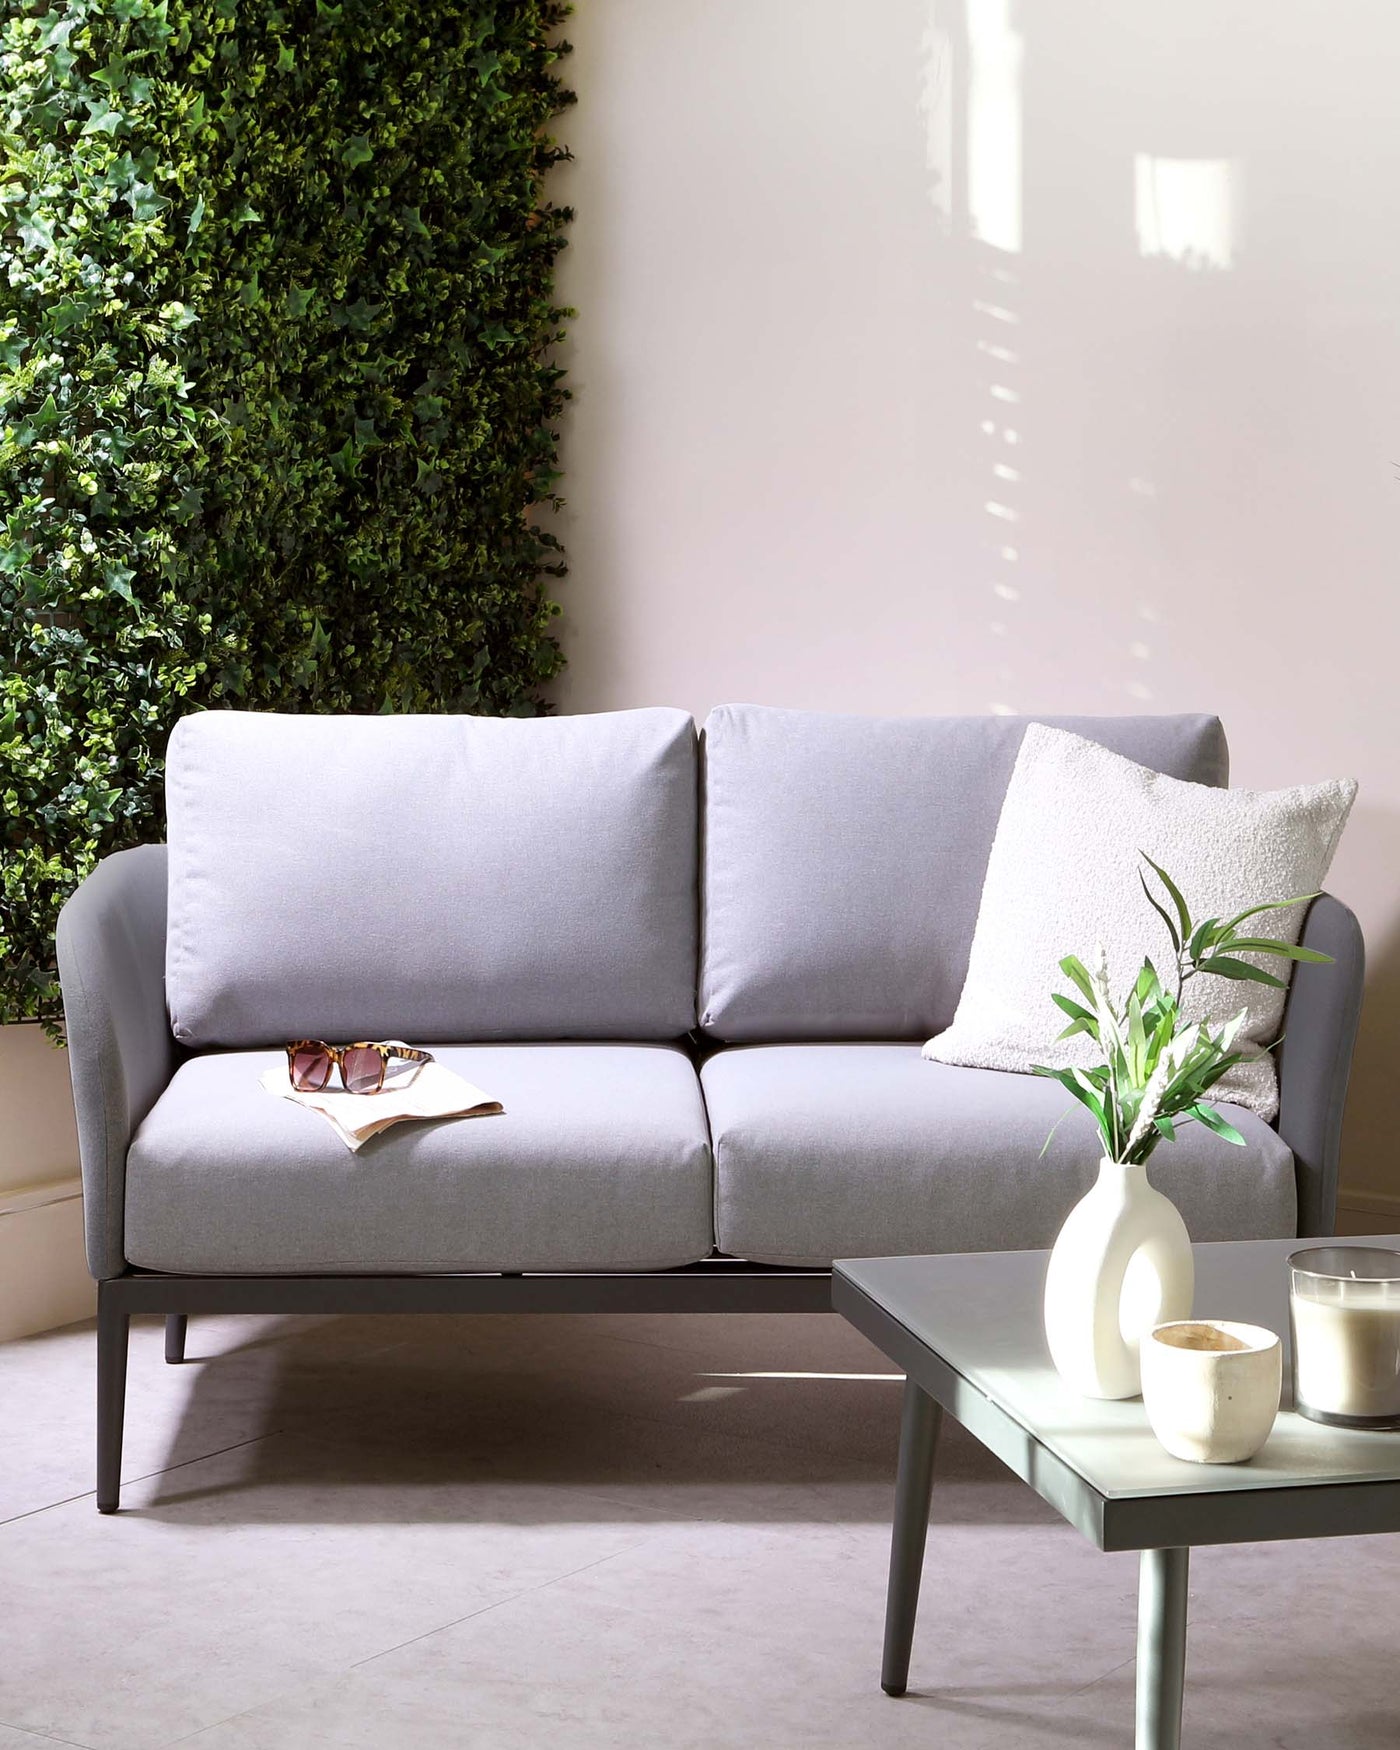 A modern minimalist style living room scene with a sleek grey upholstered two-seater sofa with clean lines, complemented by a light grey square coffee table made of a matte finish material, and accessorized with a white ceramic vase holding green foliage, alongside two candles on the tabletop. The backdrop features a vertical garden of lush greenery juxtaposed against a neutral wall, providing a refreshing contrast and a sense of tranquillity to the setting.